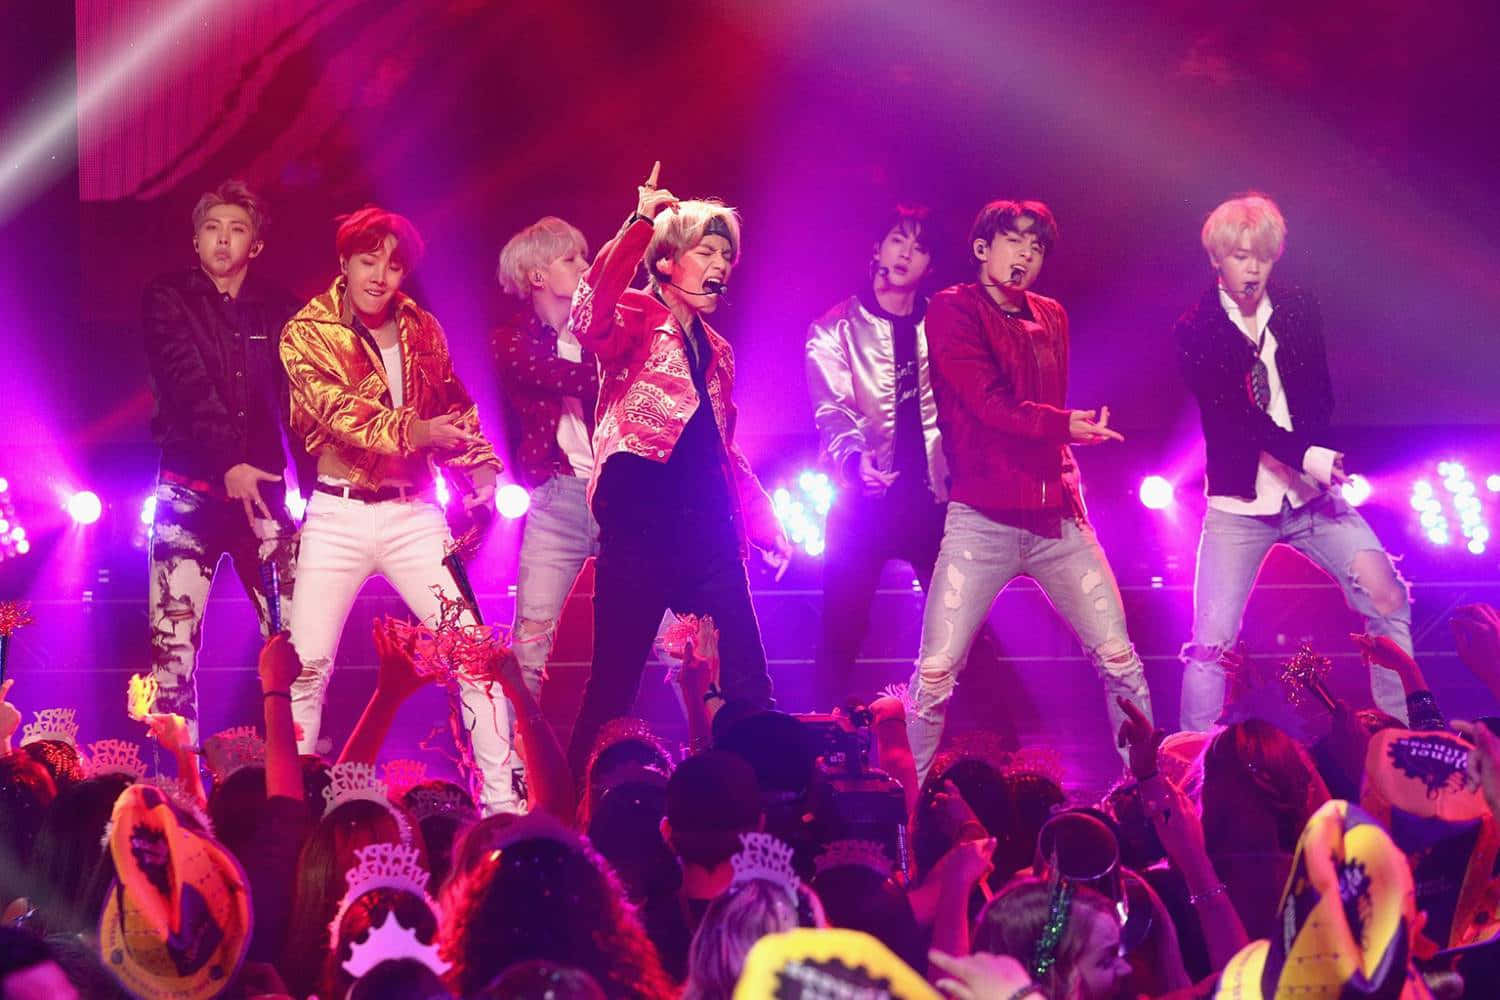 BTS putting on an incredible show at a sold-out concert.